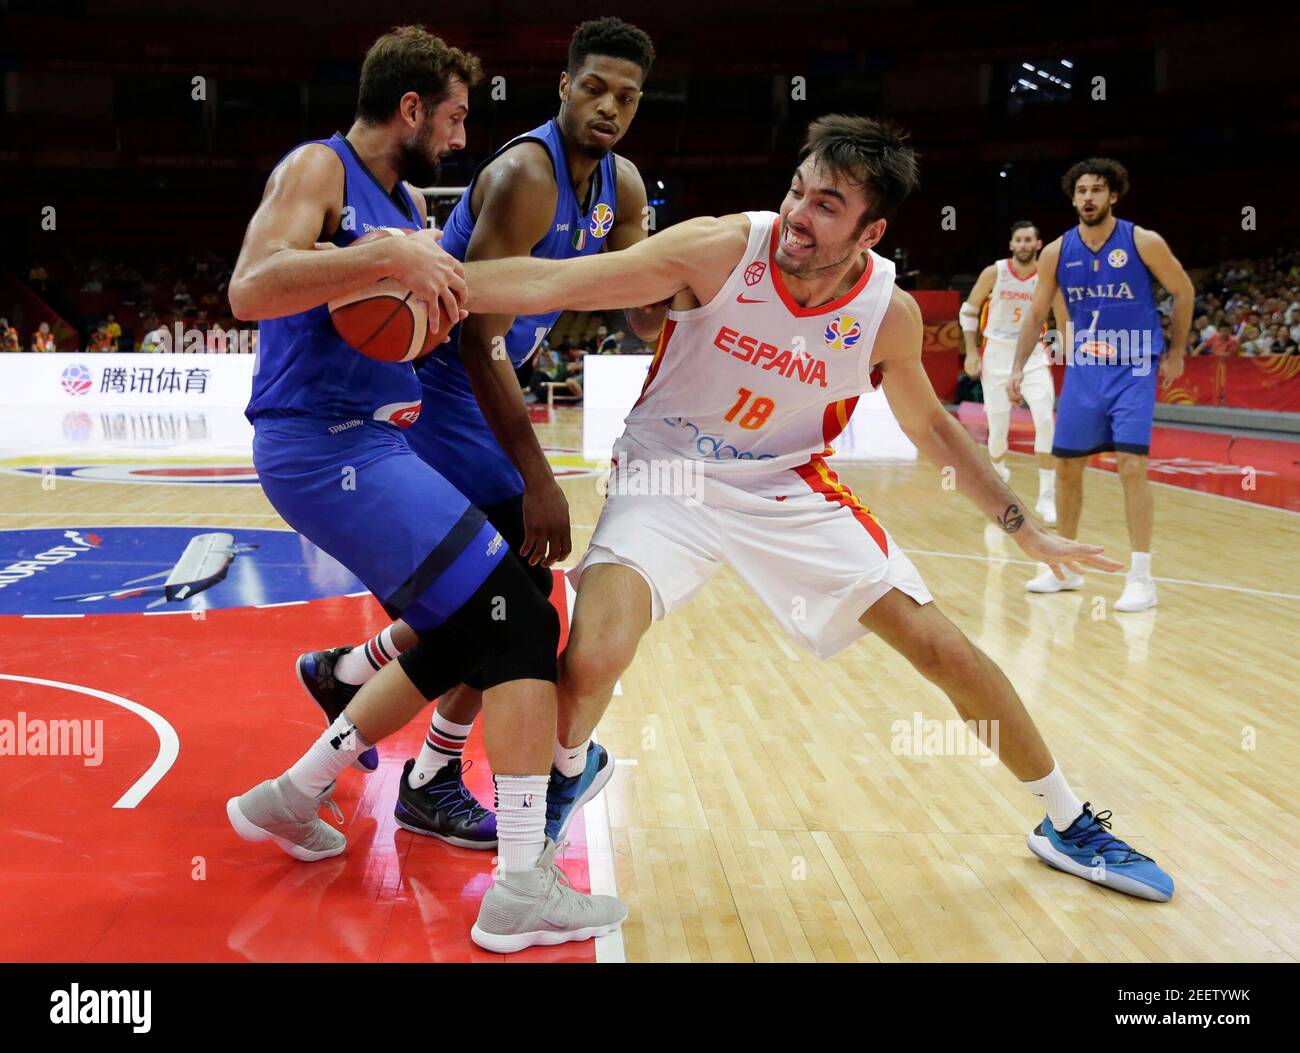 Basketball - FIBA World Cup - Second Round - Group J - Spain v Italy - Wuhan Sports Centre, Wuhan, China - September 6, 2019 Spain's Pierre Oriola in action with Italy's Marco Belinelli and Italy's Jeff Brooks REUTERS/Jason Lee Stock Photo